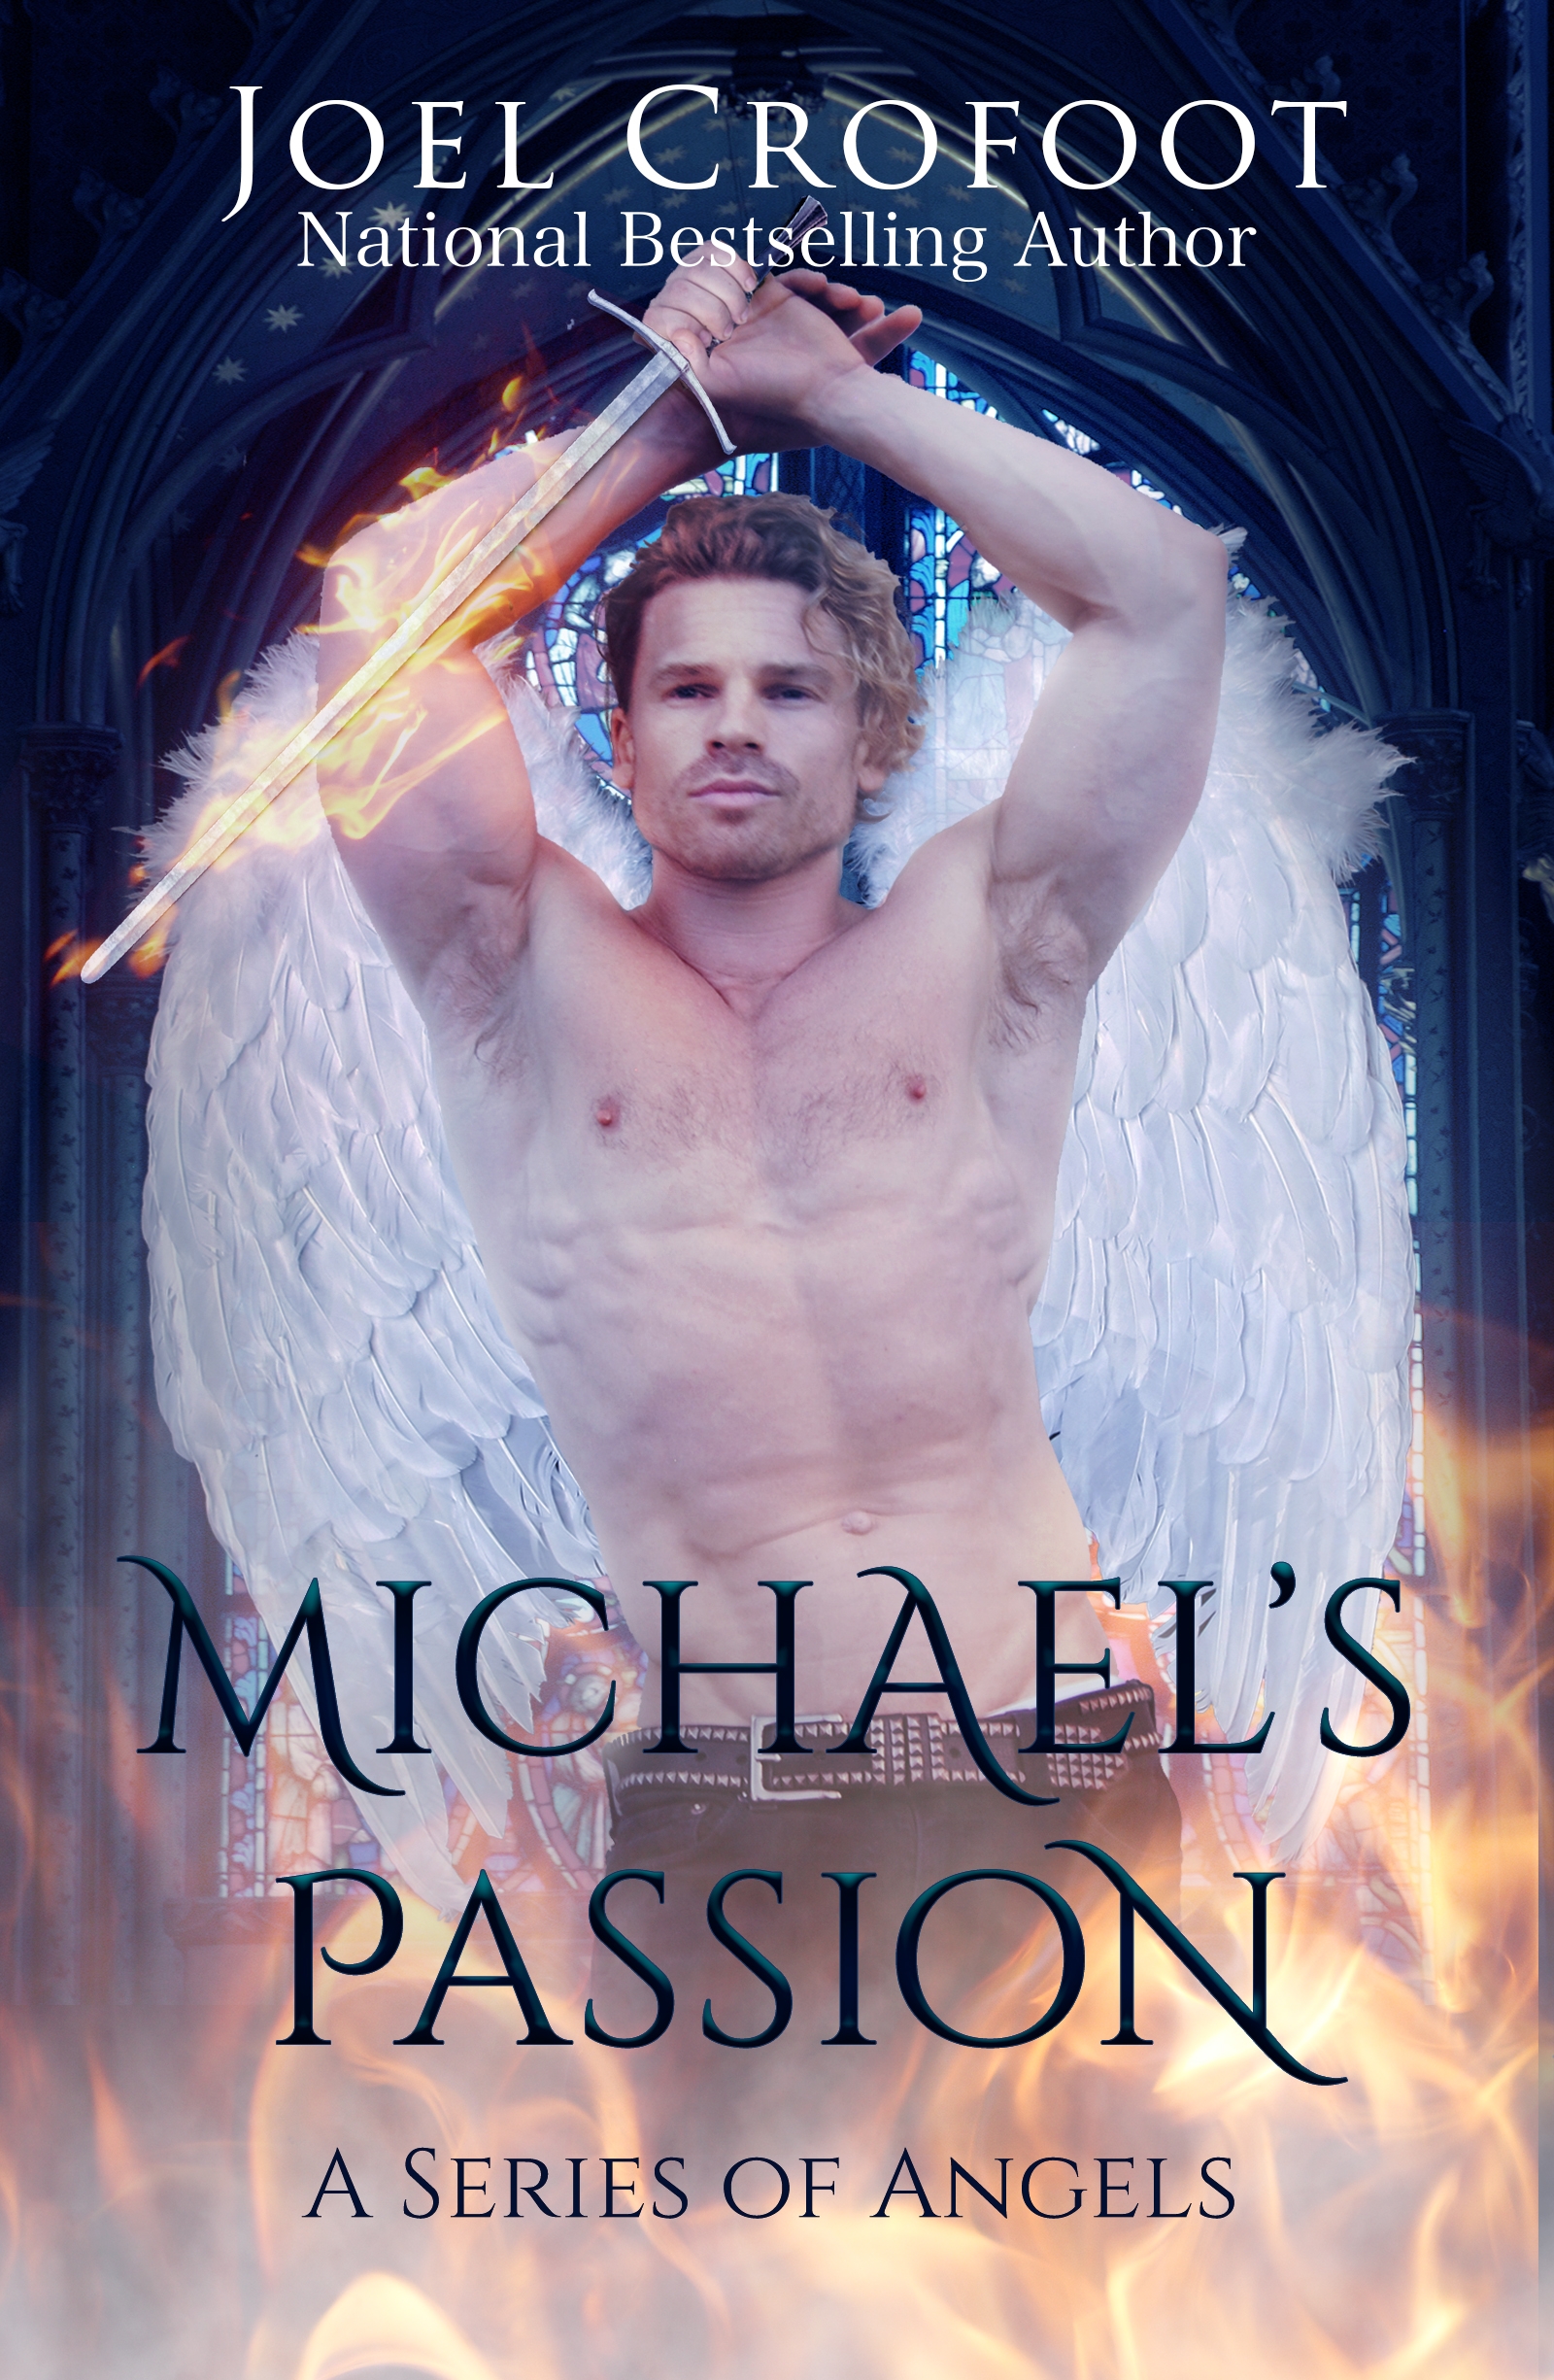 FREE: Michael’s Passion by Joel Crofoot